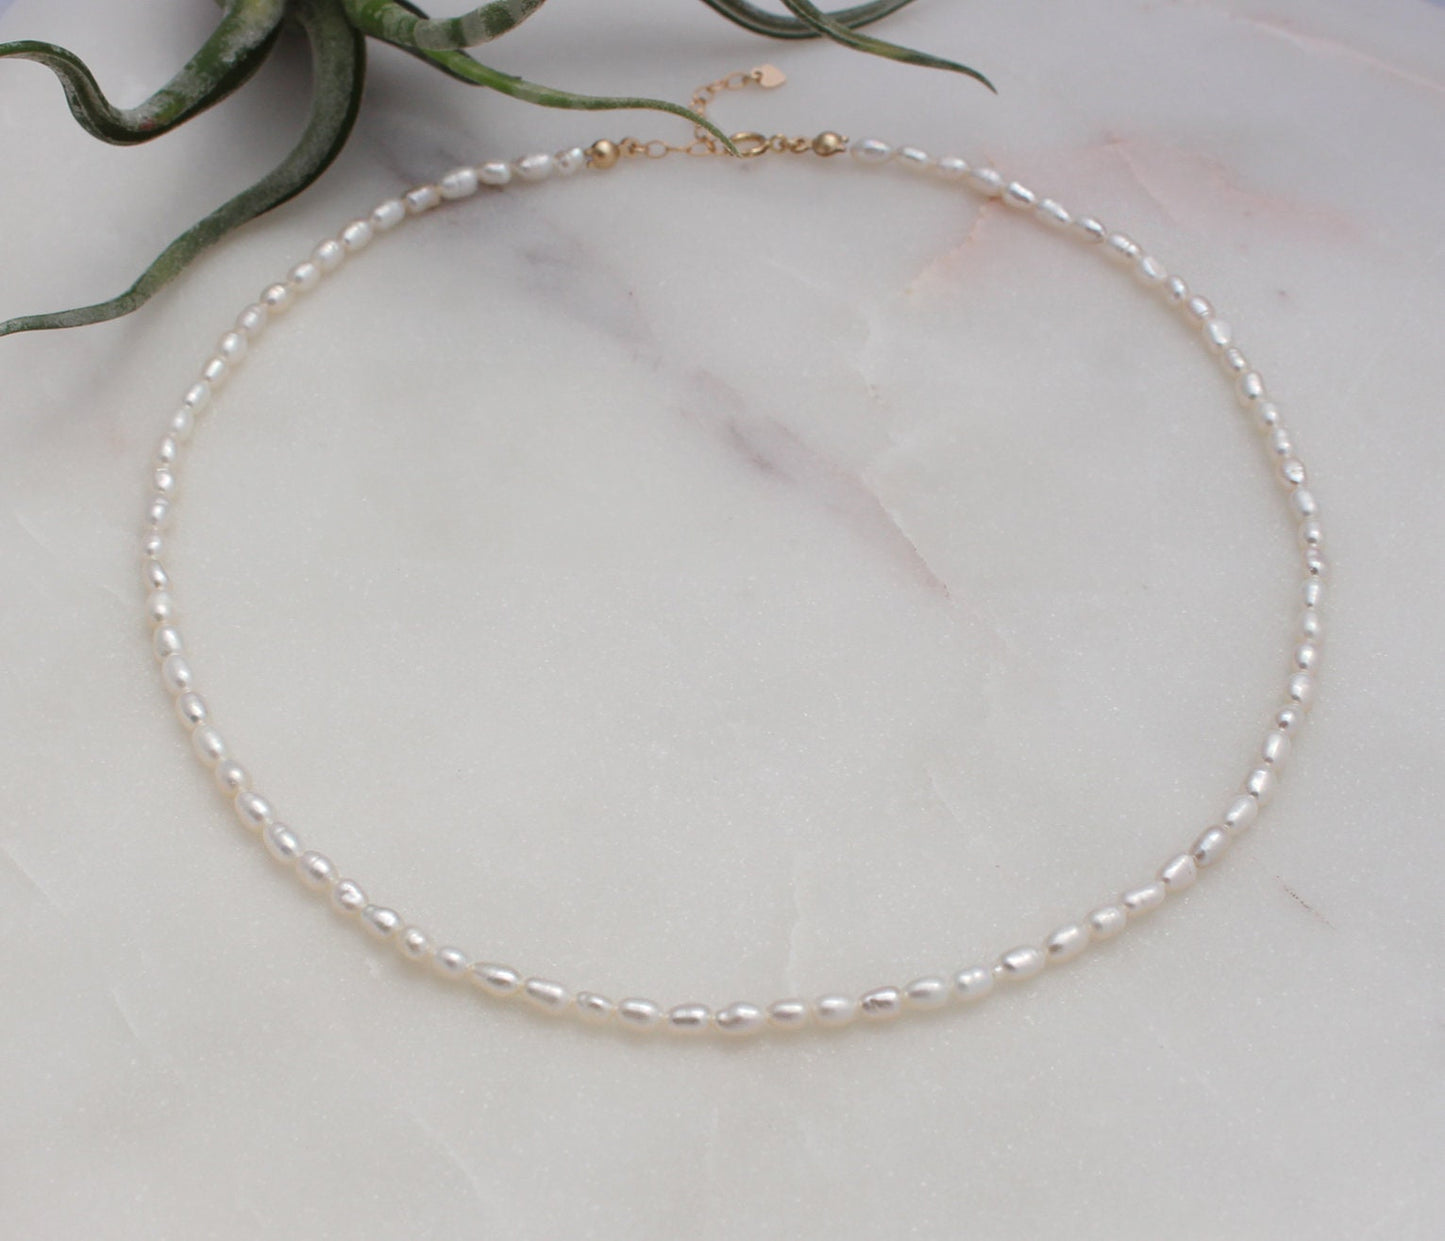 Rice Pearl Necklace - 14k Gold Filled Clasp & Extender, 3-4mm White Freshwater Natural Rice Pearl, Medium Seed Pearl